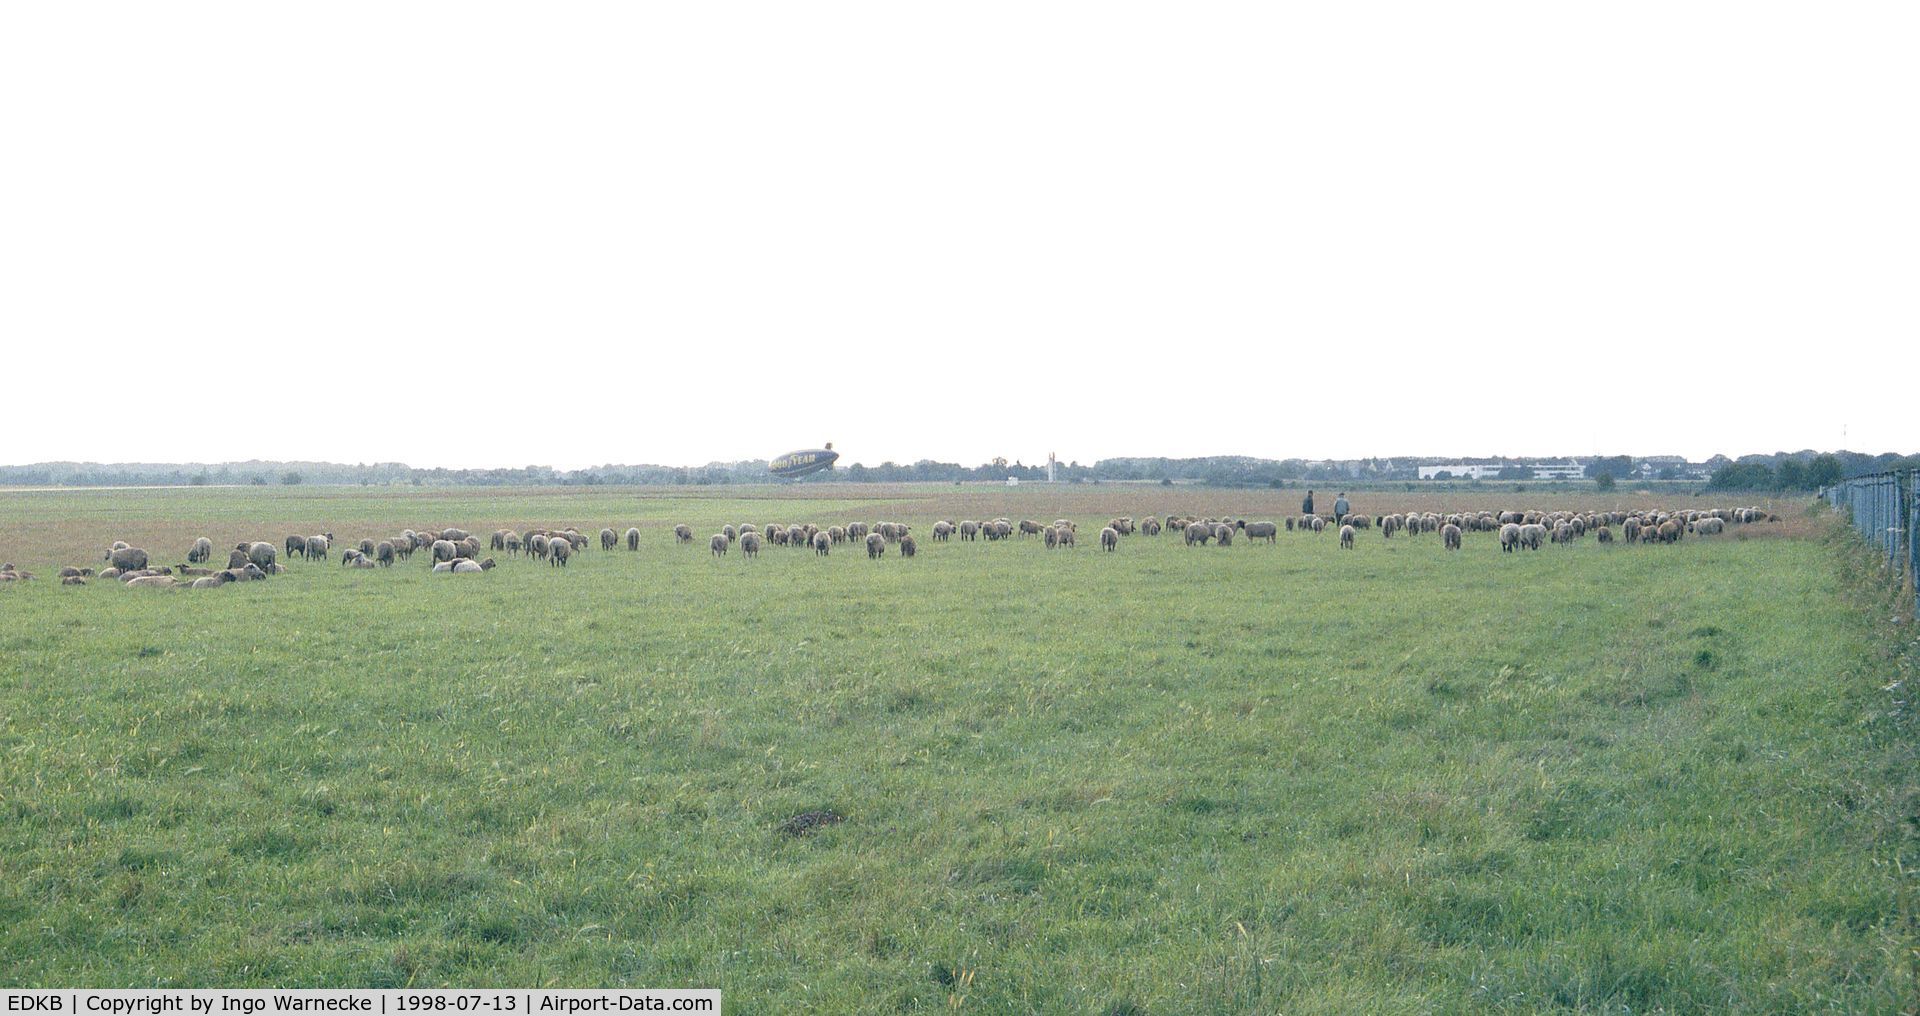 Bonn-Hangelar Airport, Sankt Augustin Germany (EDKB) - the airfield mowing and fertilizing team (i.e. herd of sheep) in action, but well away from the runway